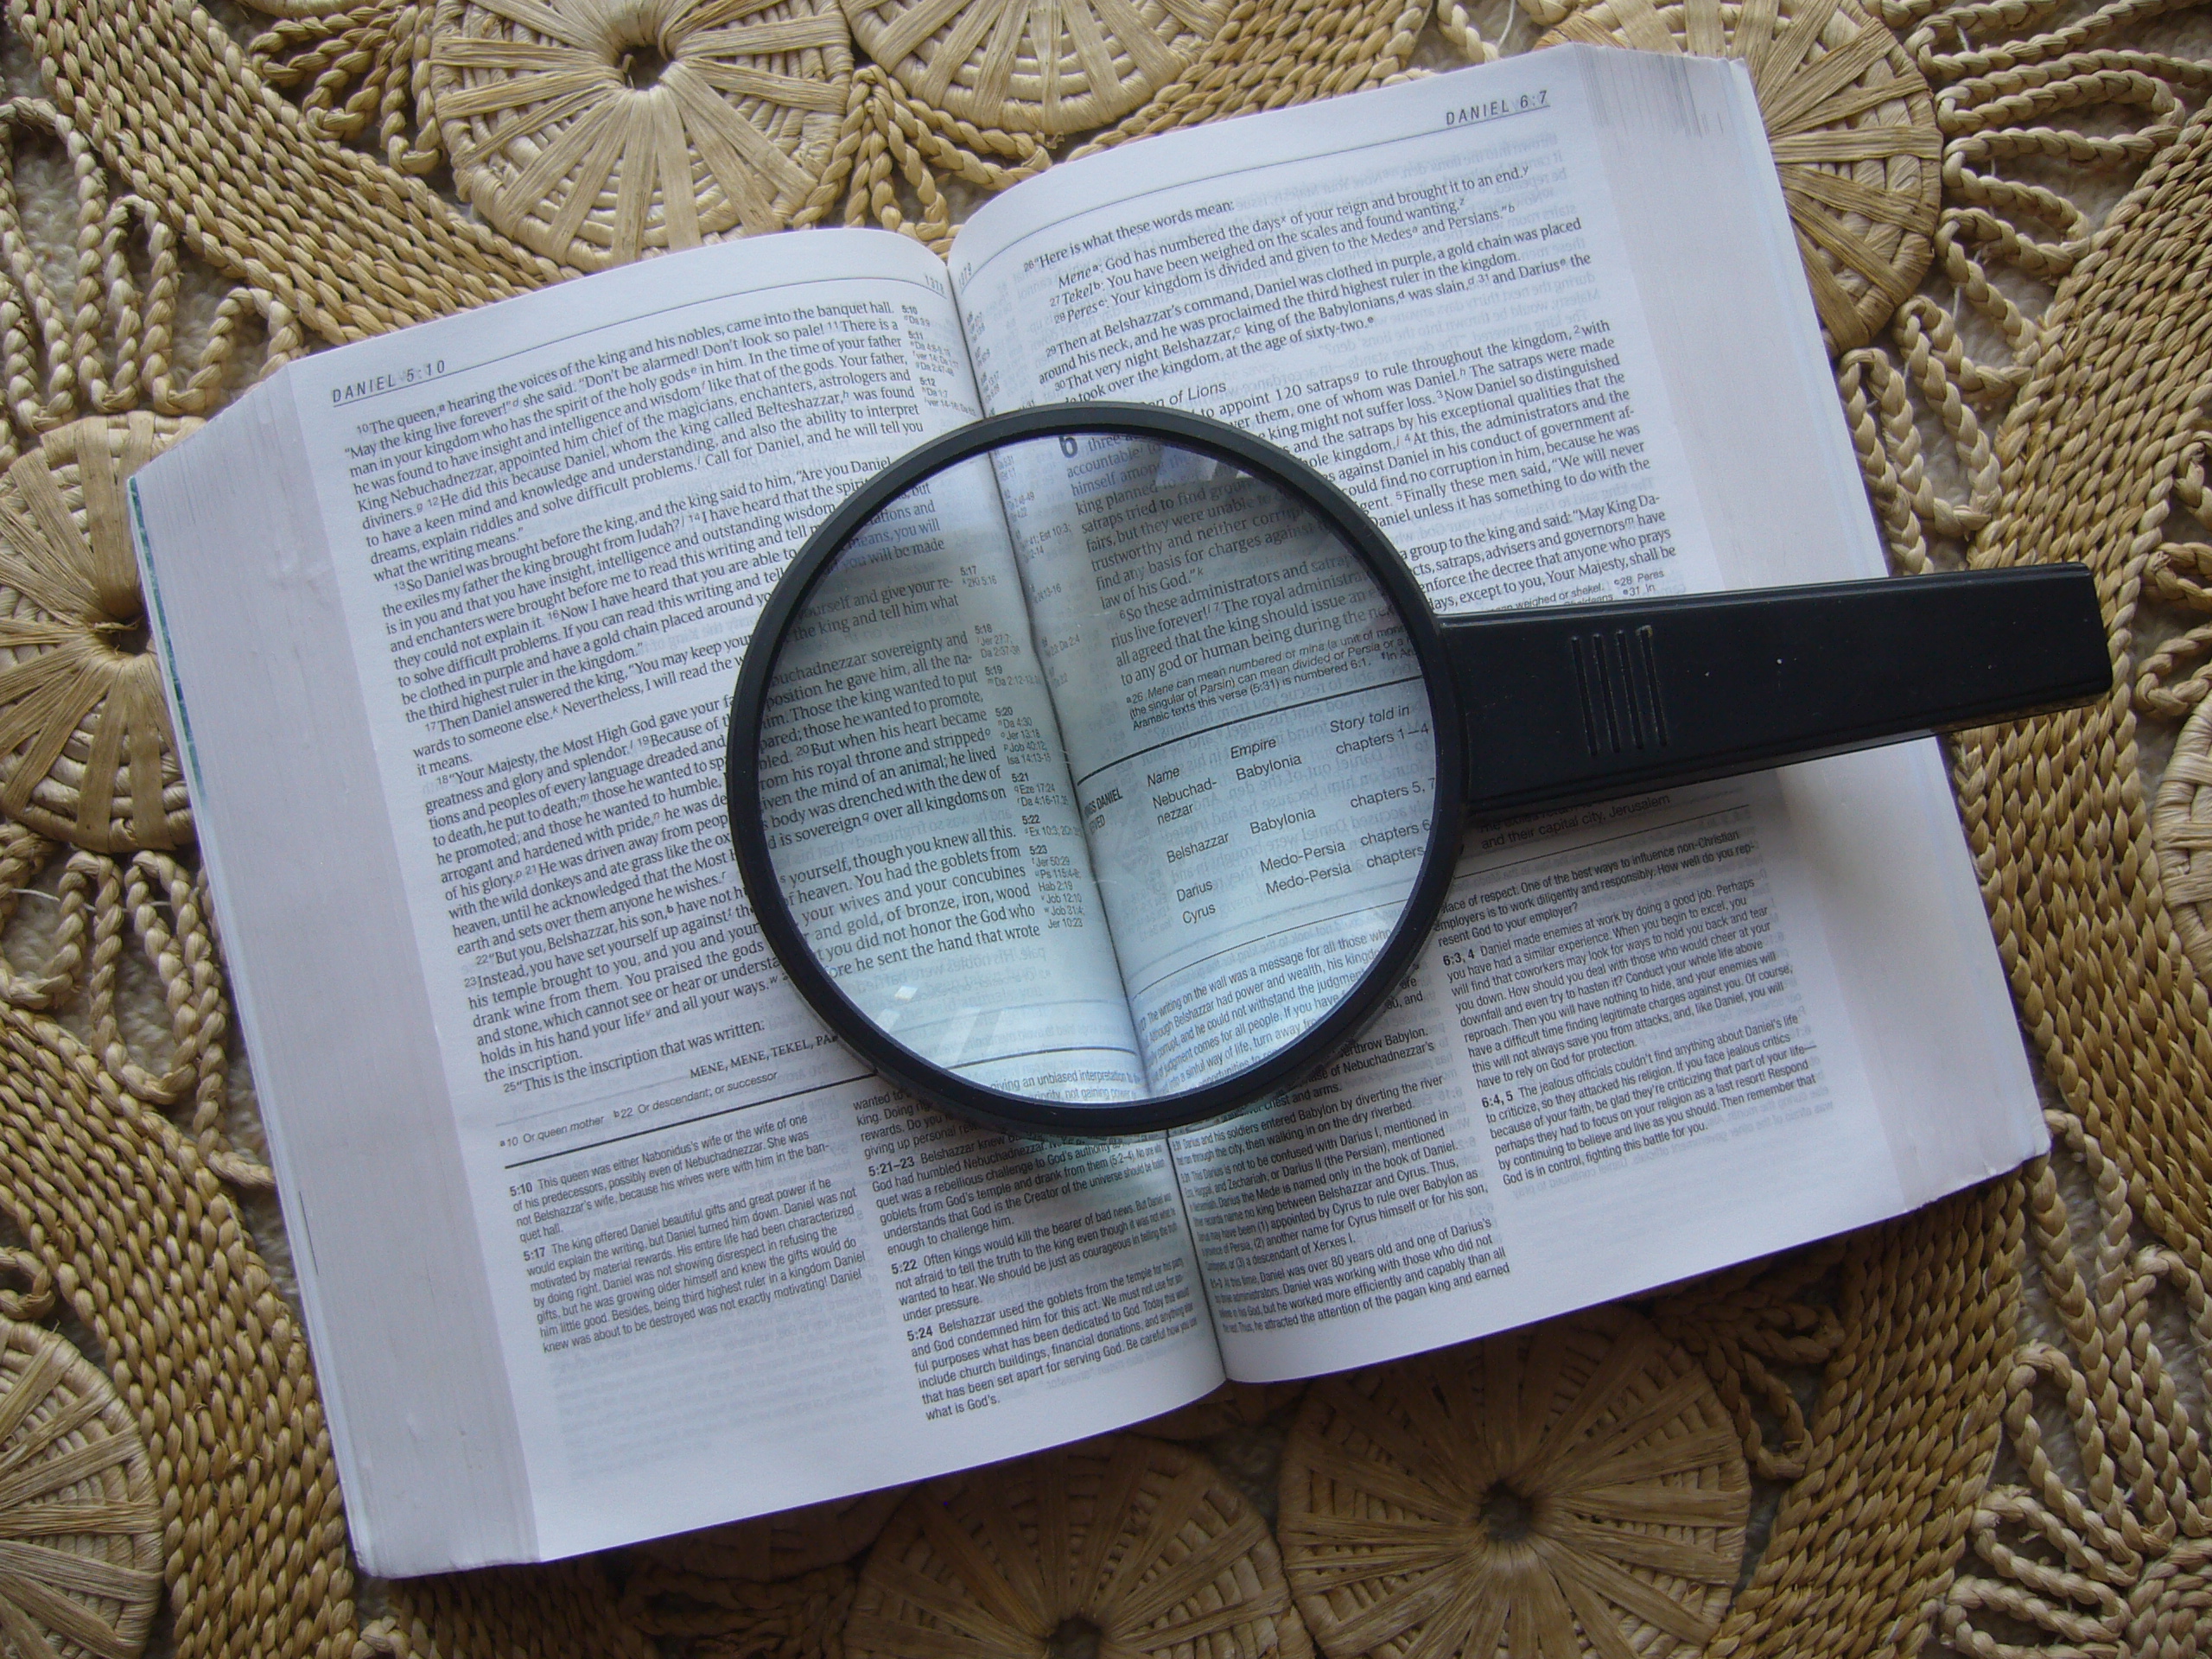 The magnifying glass is a real help to read The Life Application Study Bible